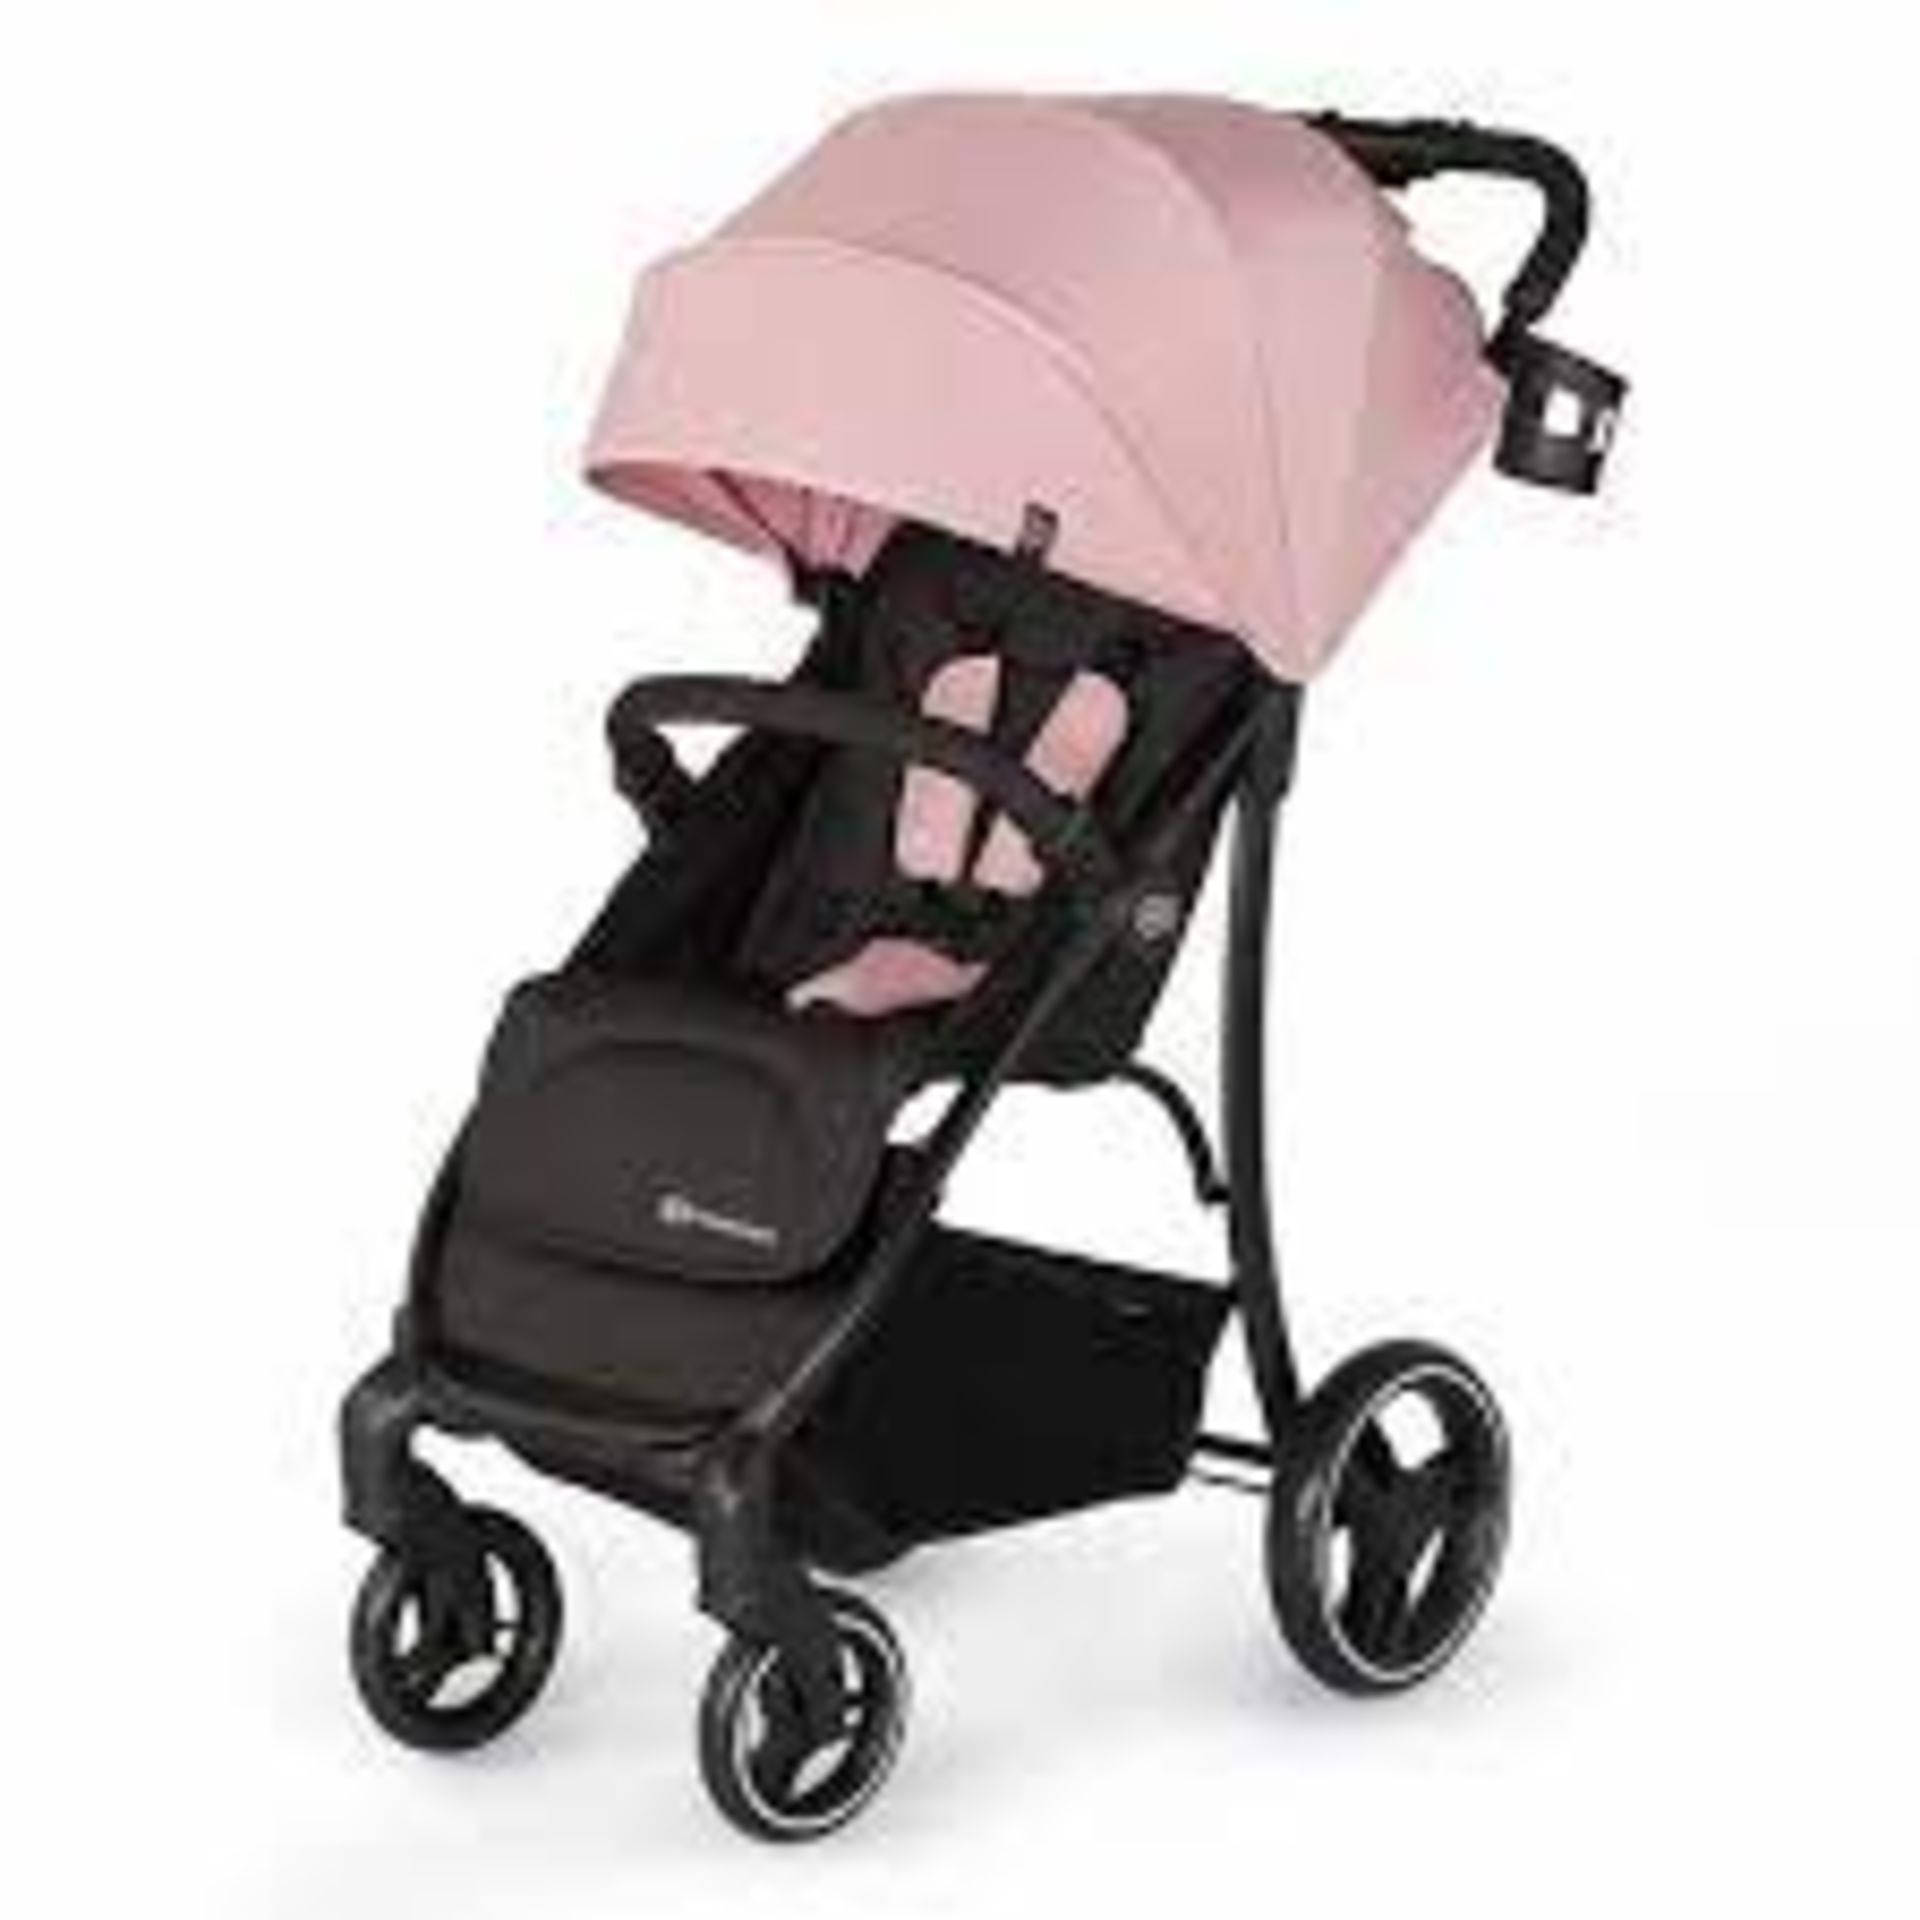 RRP £180 lot to contain kinderkraft stroller in pink